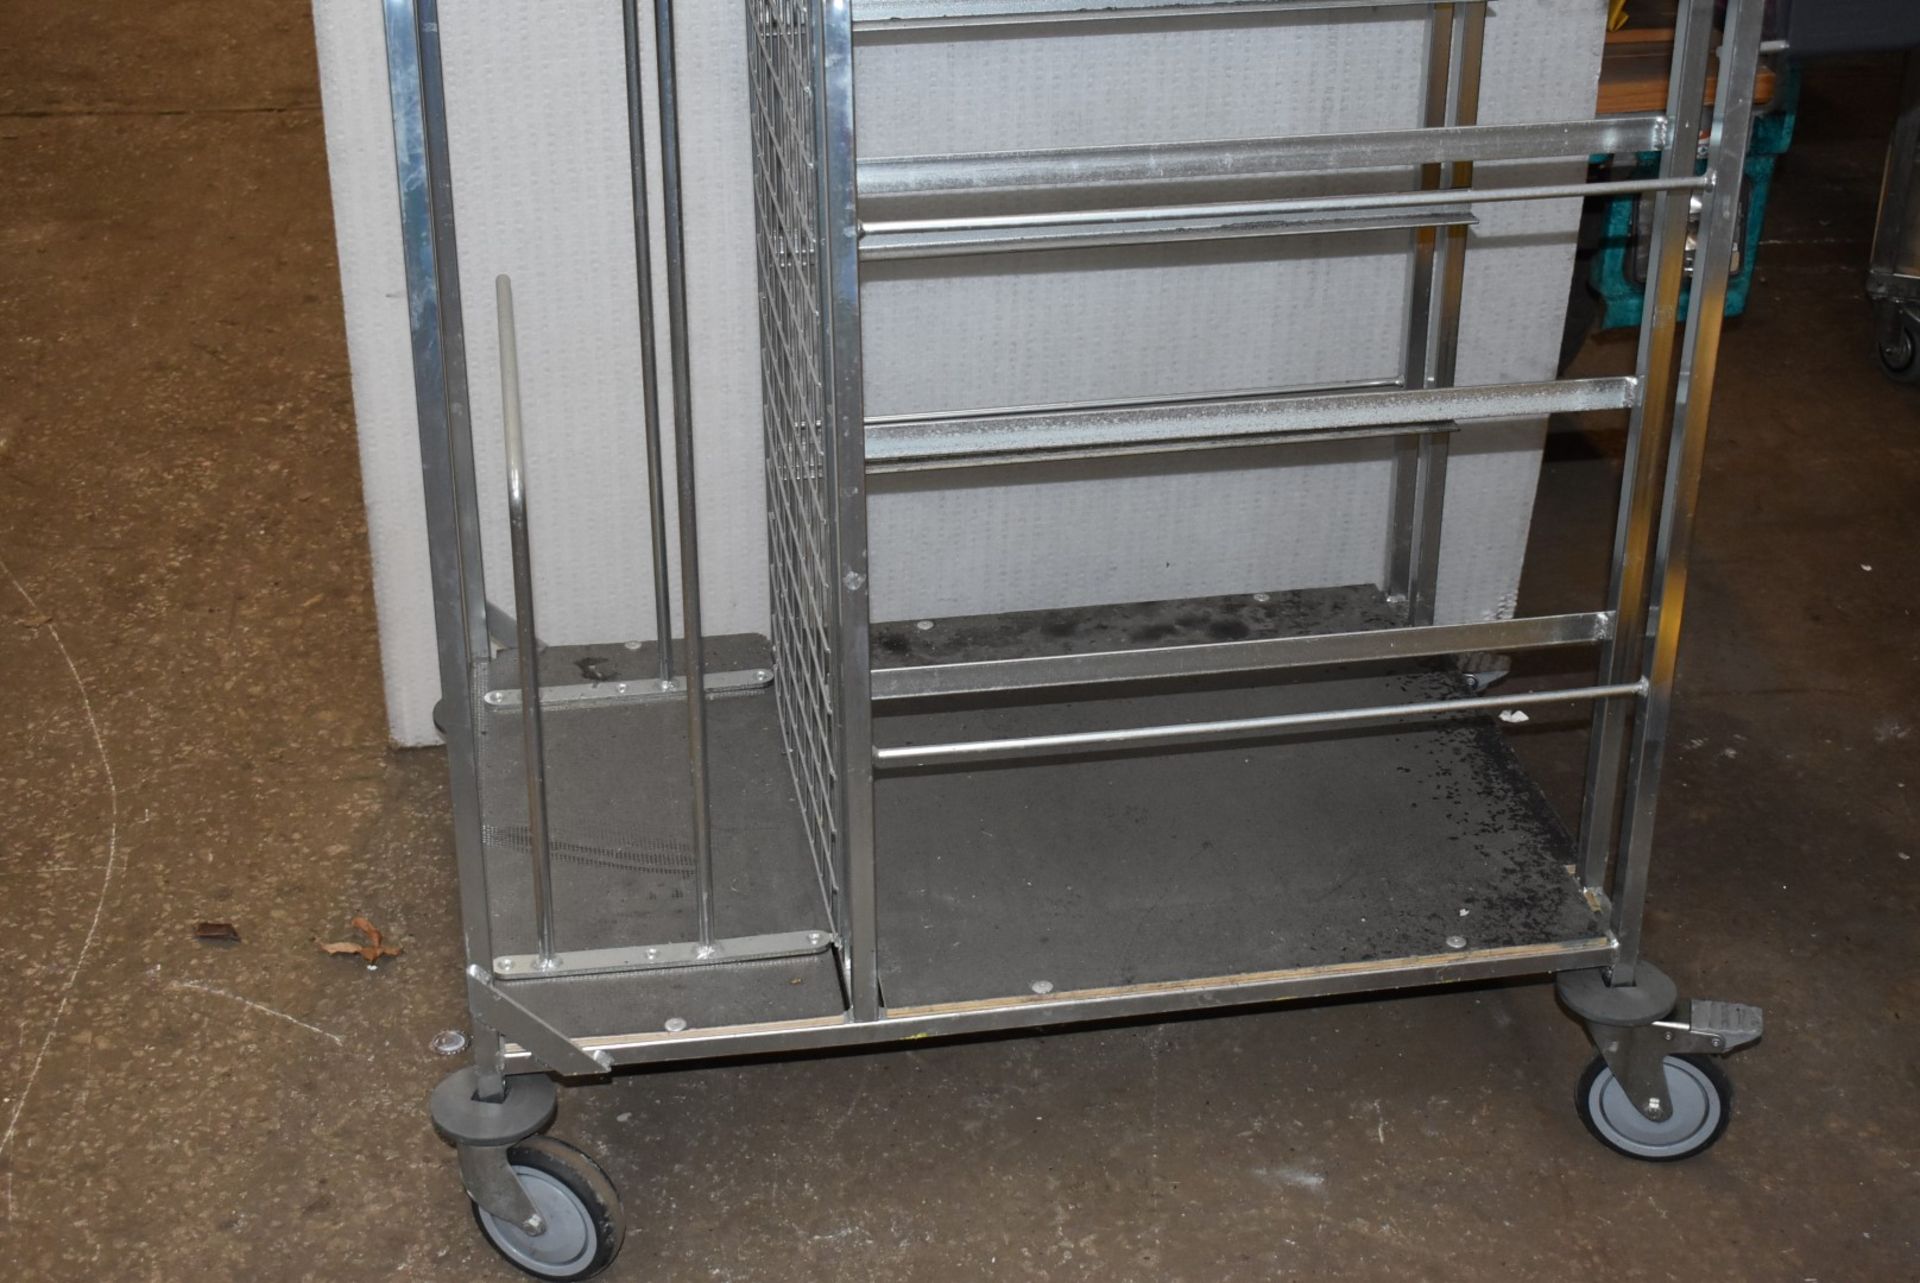 1 x Mobile Picker / Packer Trolly - Overall Size H105 x W100 x D60 cms - CL011 - Ref GCA WH5 - - Image 3 of 5